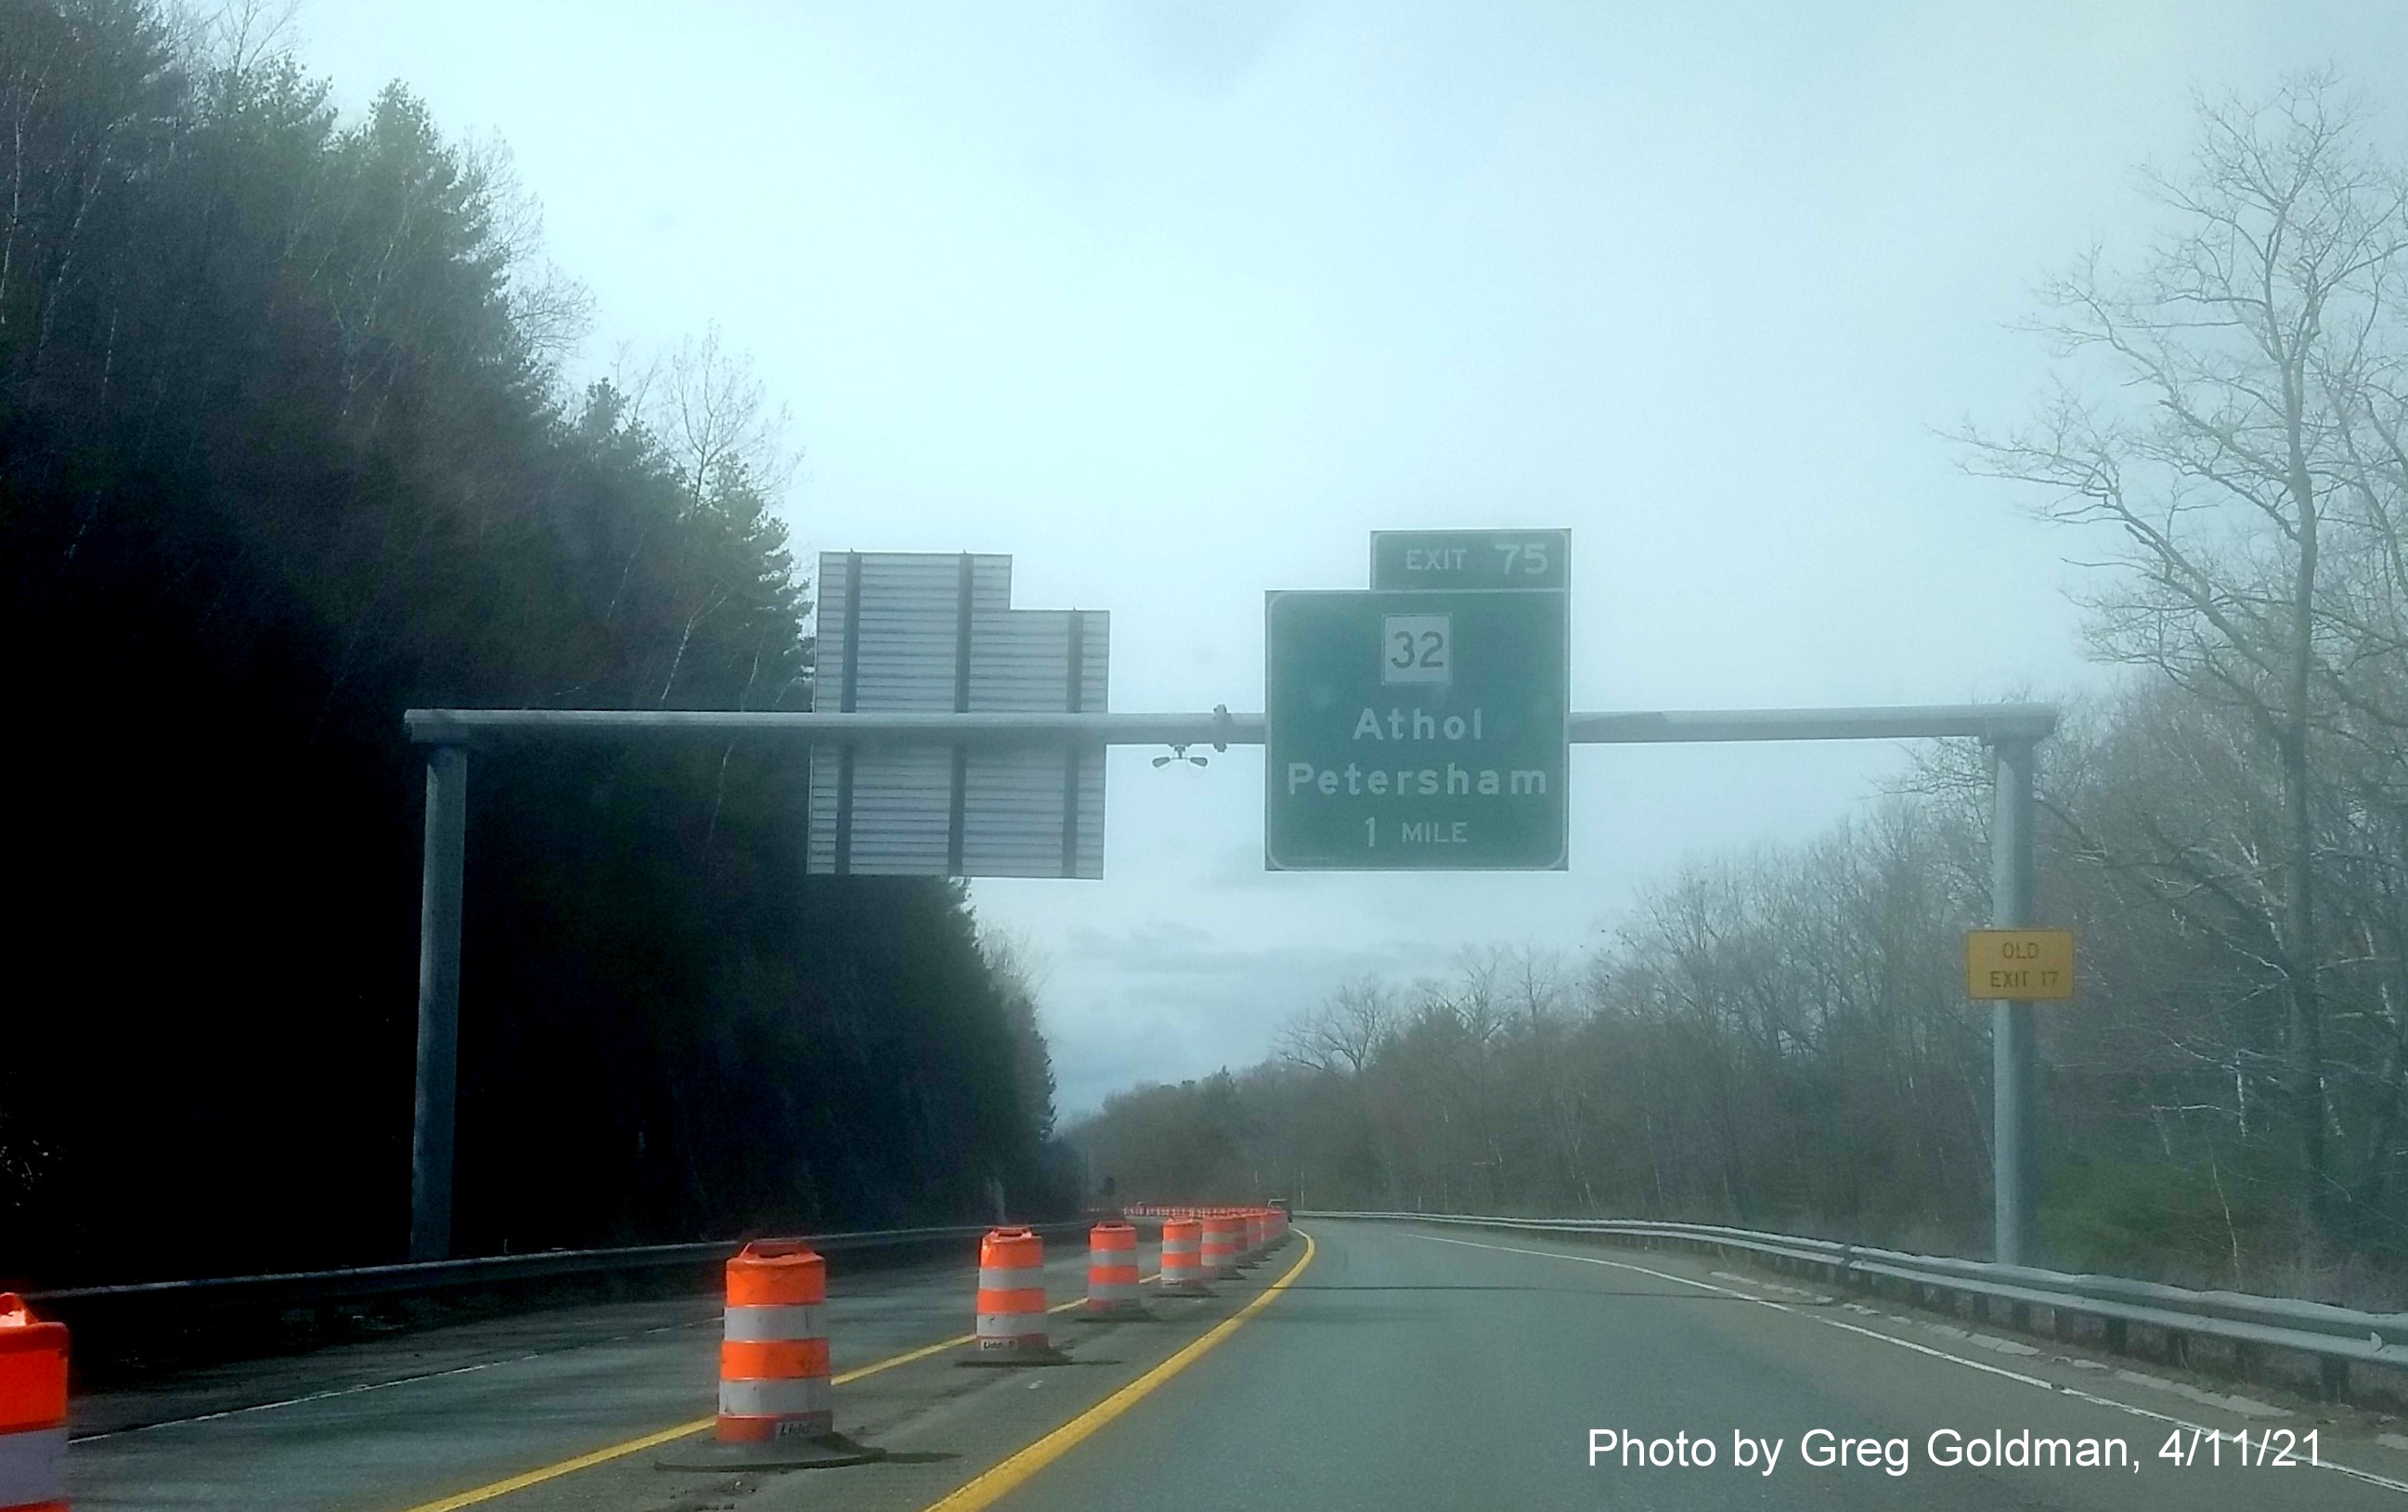 Image of 1 Mile advance sign for MA 32 exit with new milepost based exit number with yellow Old Exit 17 advisory sign on support on MA 2 West in Athol, by Greg Goldman, April 2021